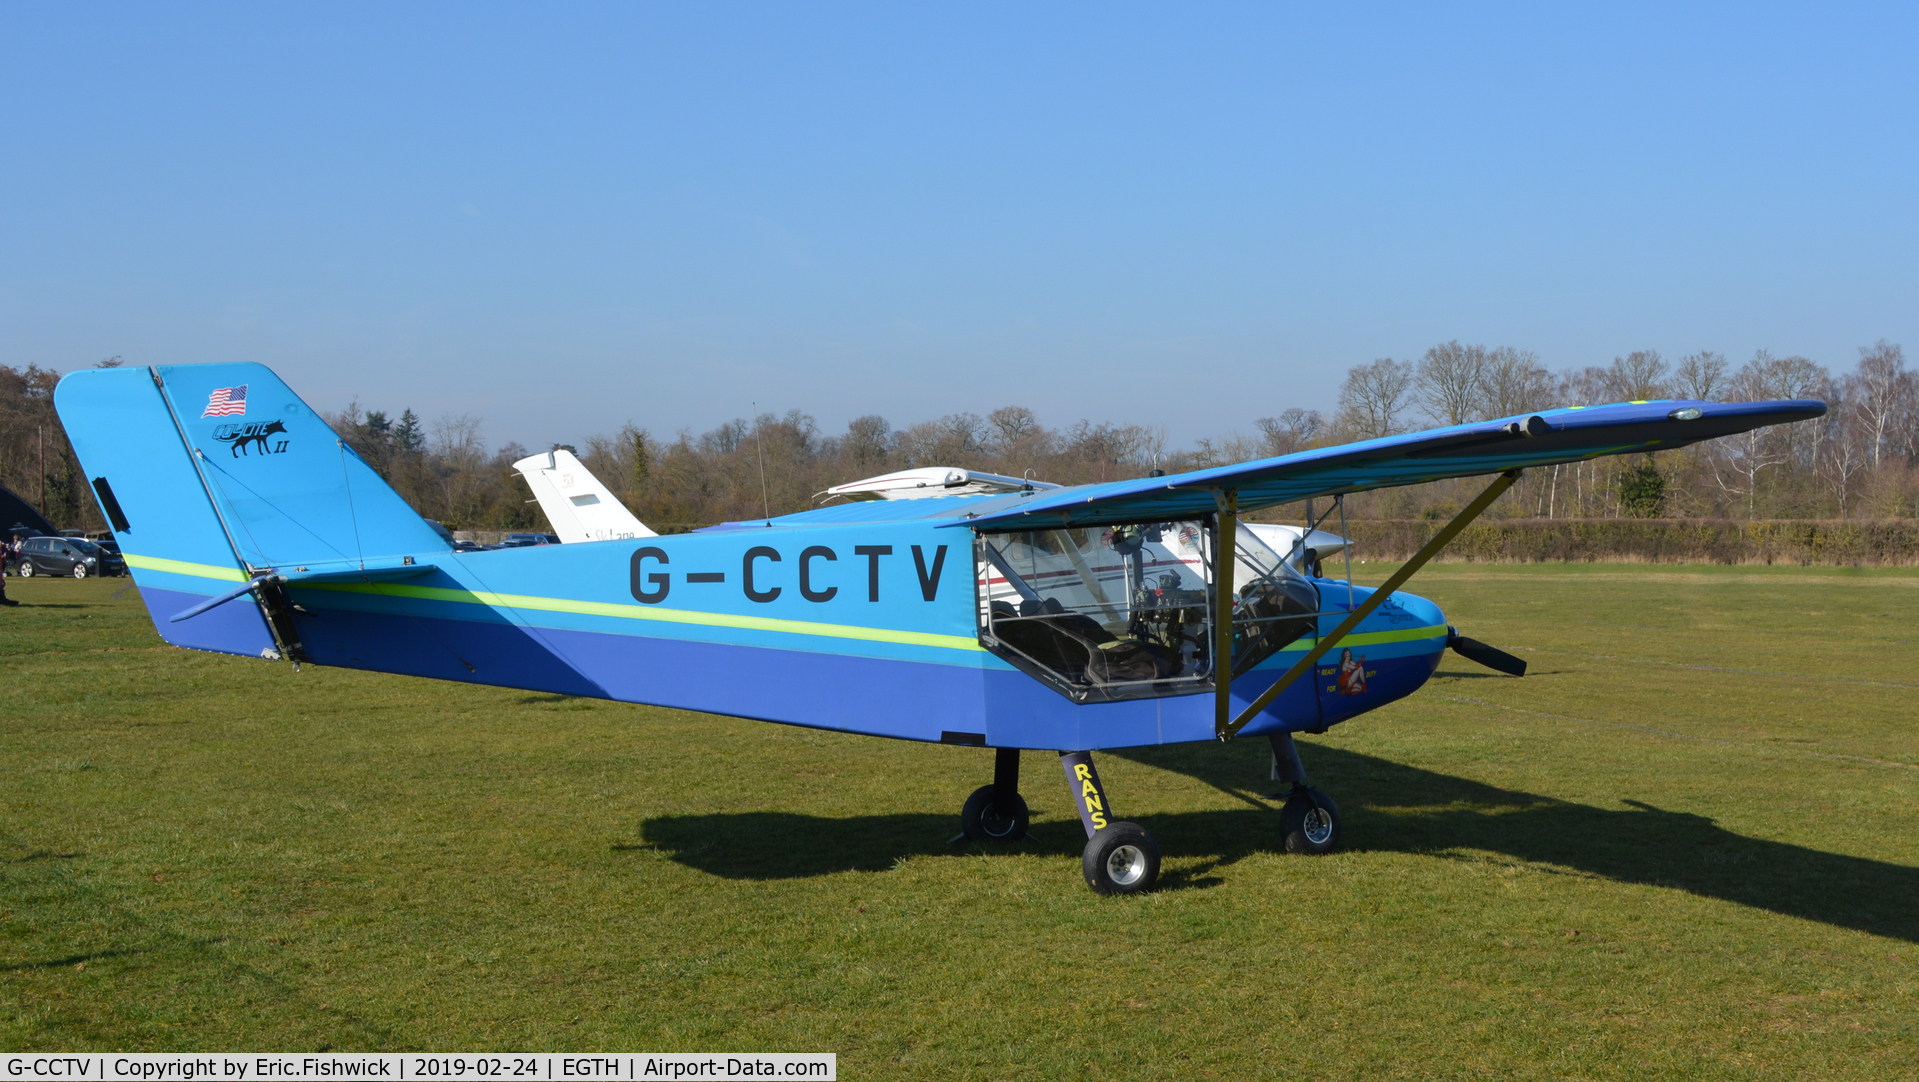 G-CCTV, 2003 Rans S-6ES Coyote II C/N PFA 204-14069, 2. G-CCTV at the Shuttleworth Collection, Feb. 2019.